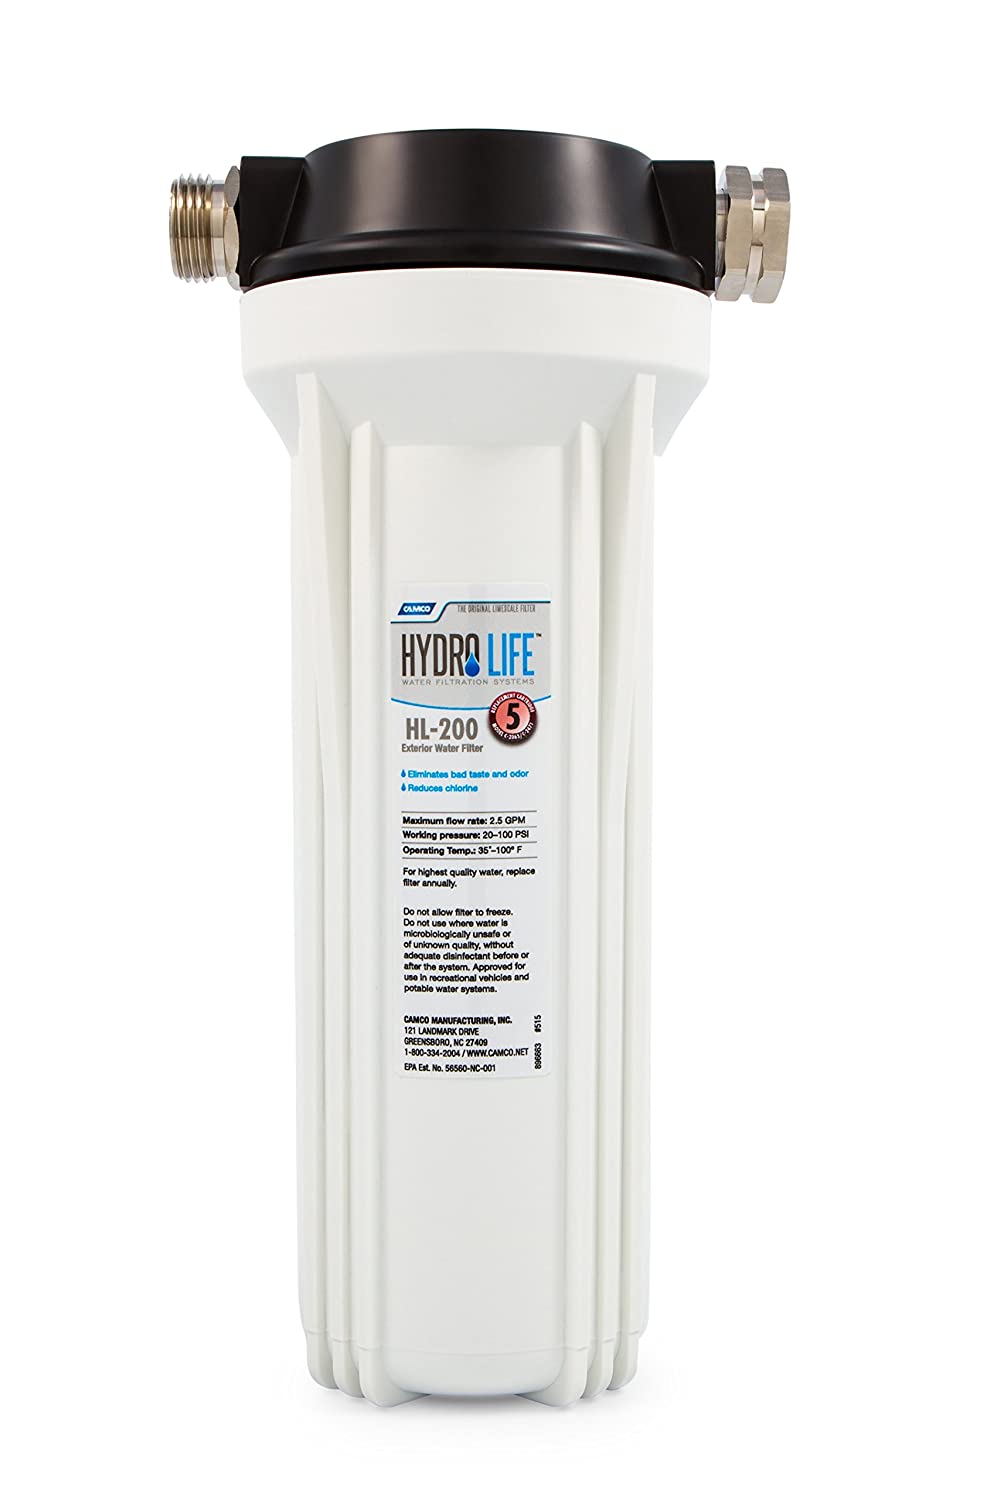 hydro life rv water filter